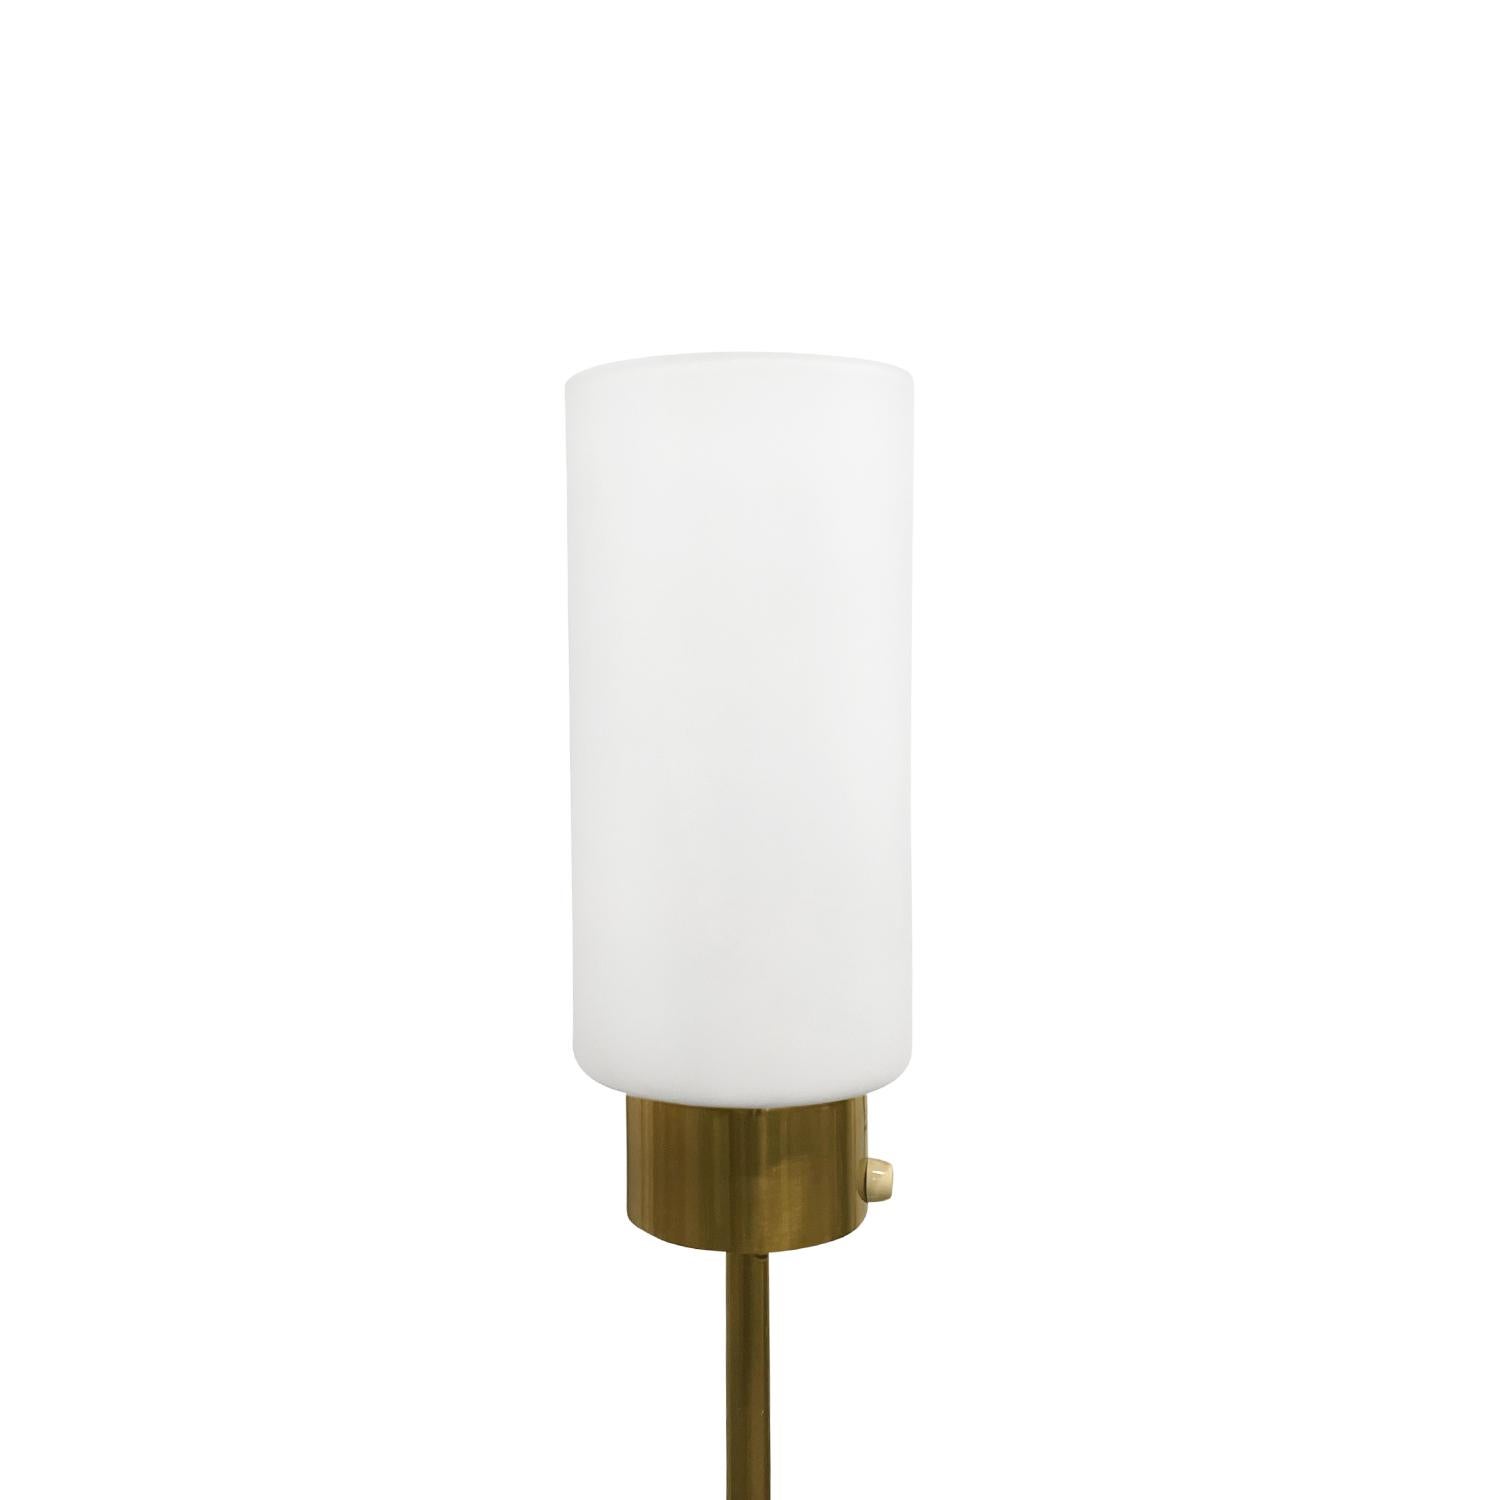 20th Century Swedish AB Markaryd Brass Floor Lamp by Hans-Agne Jakobsson In Good Condition For Sale In West Palm Beach, FL